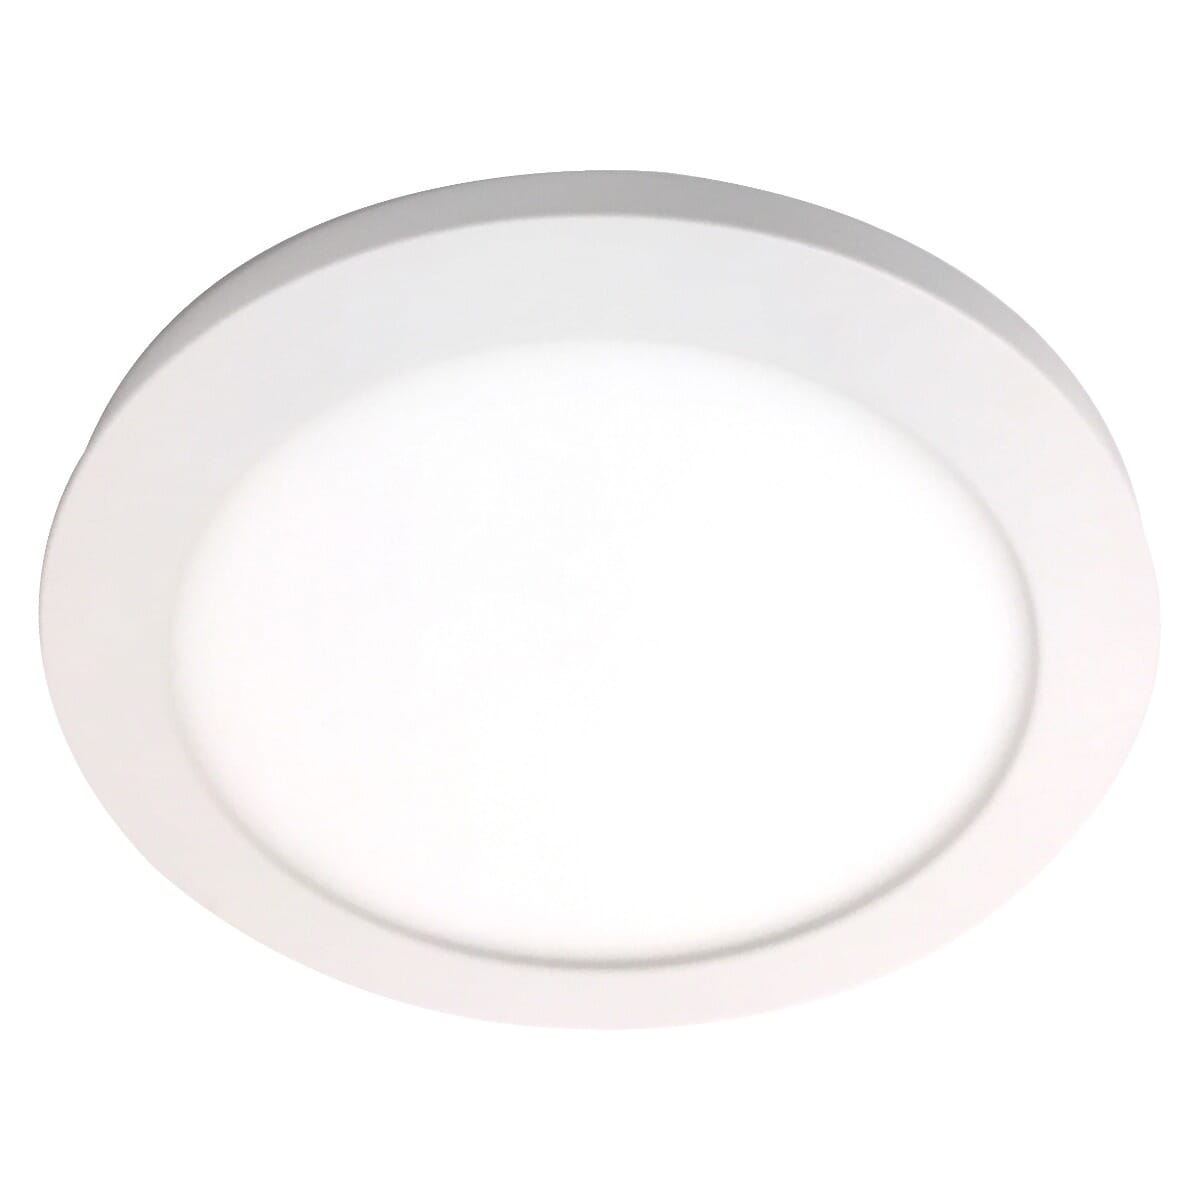 Access Disc 5.5" Flat Ceiling Light in White